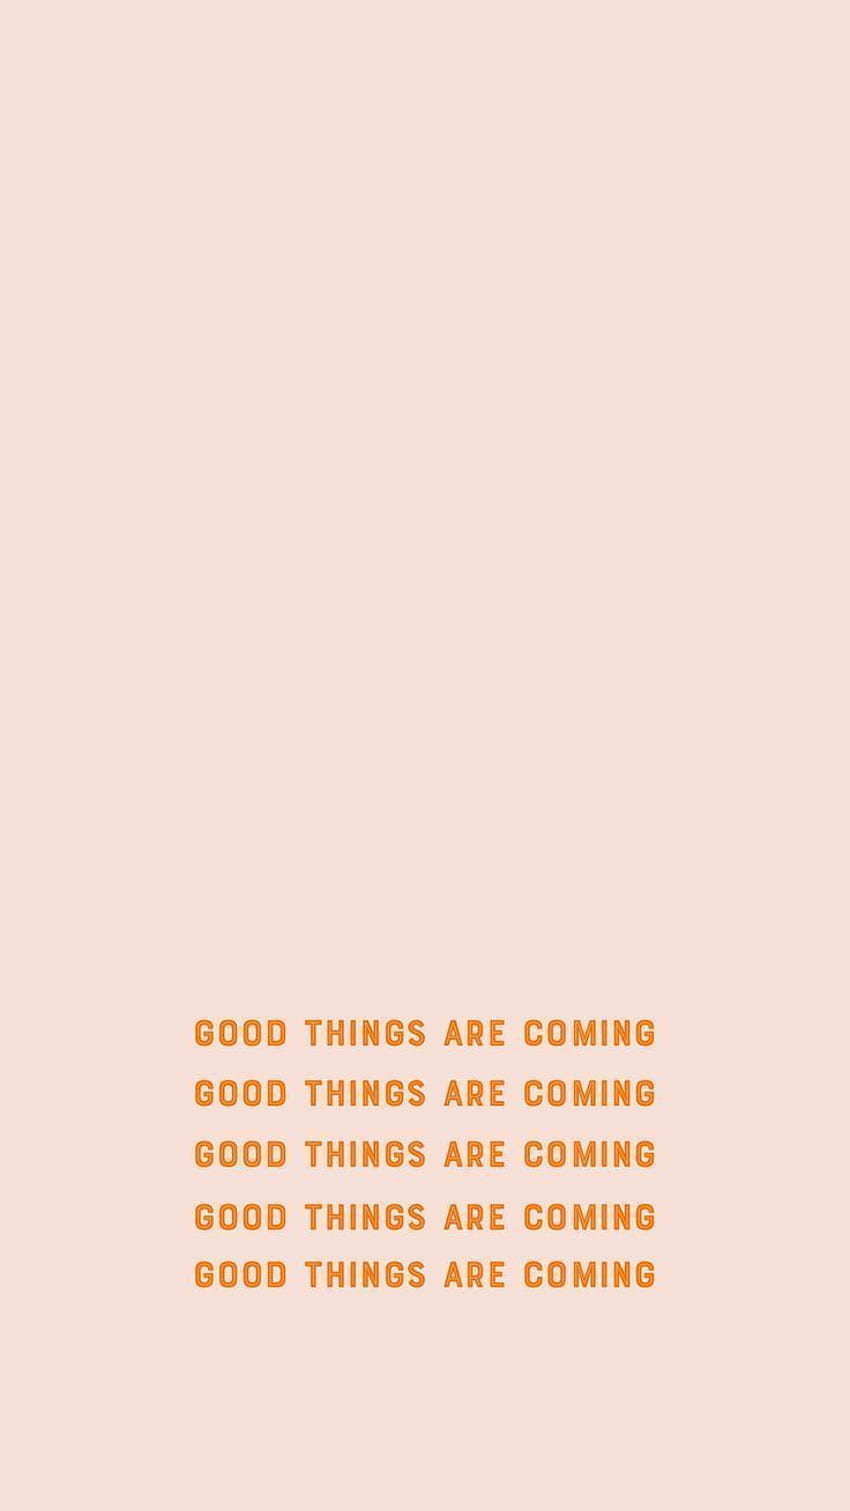 Quotes About Leadership : Good things are coming. Quotes HD phone wallpaper